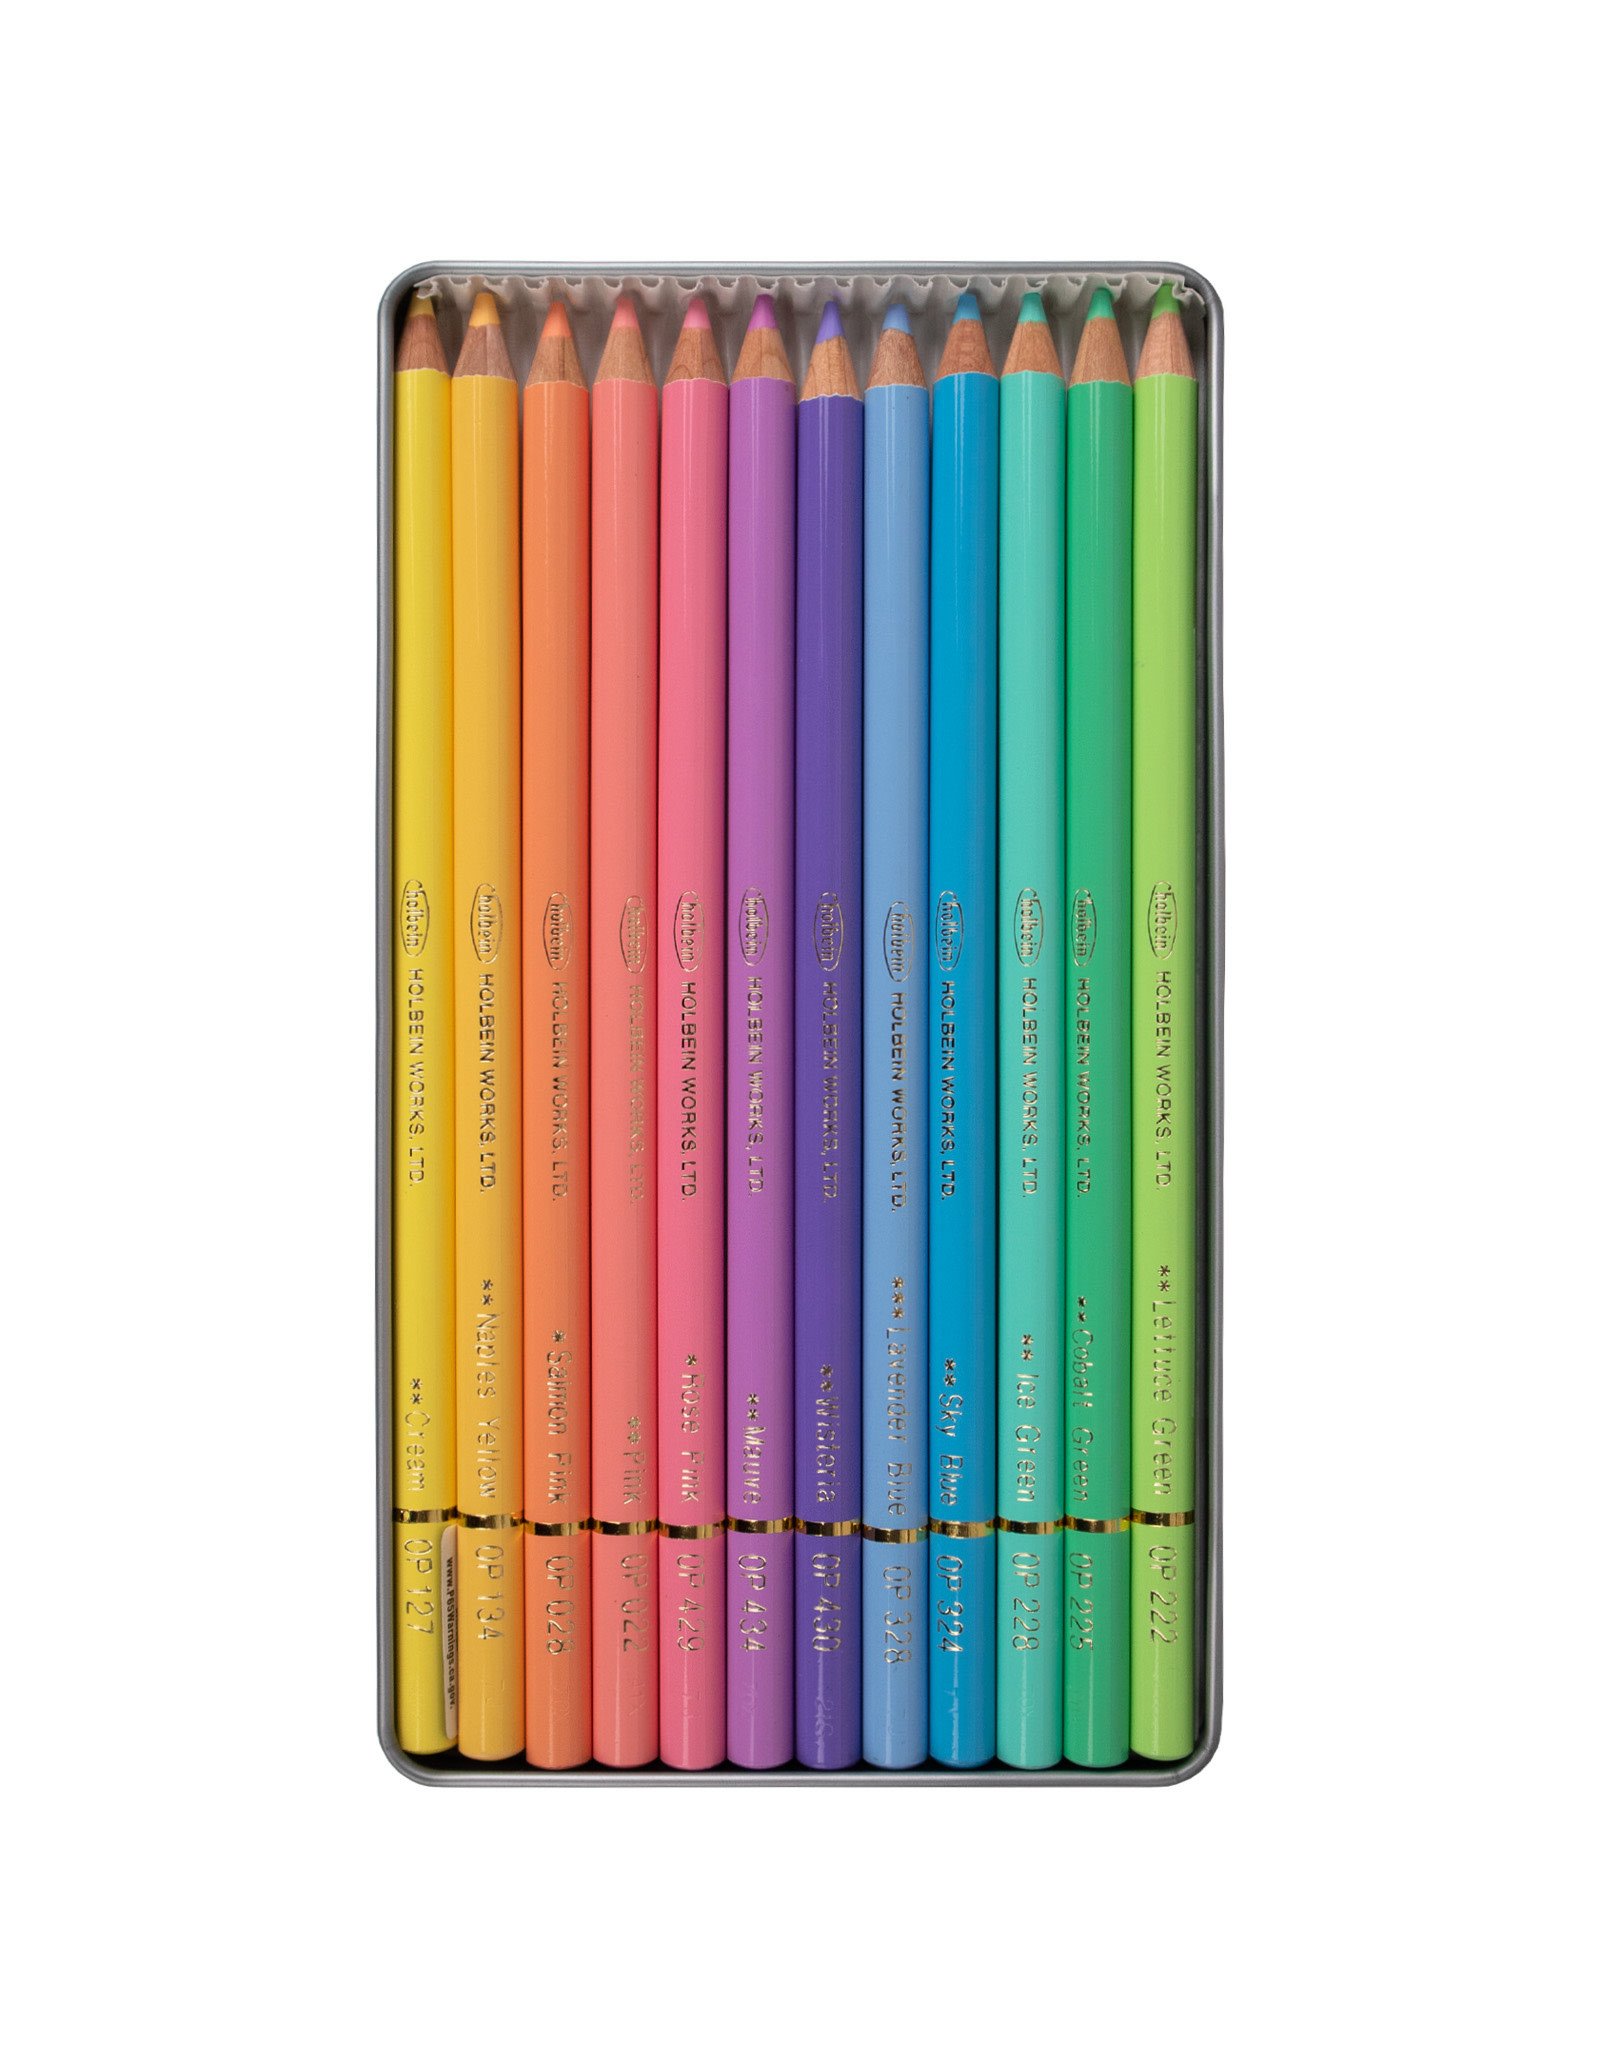 Holbein Artists' Colored Pencil Set of 12 - Pastel Colors